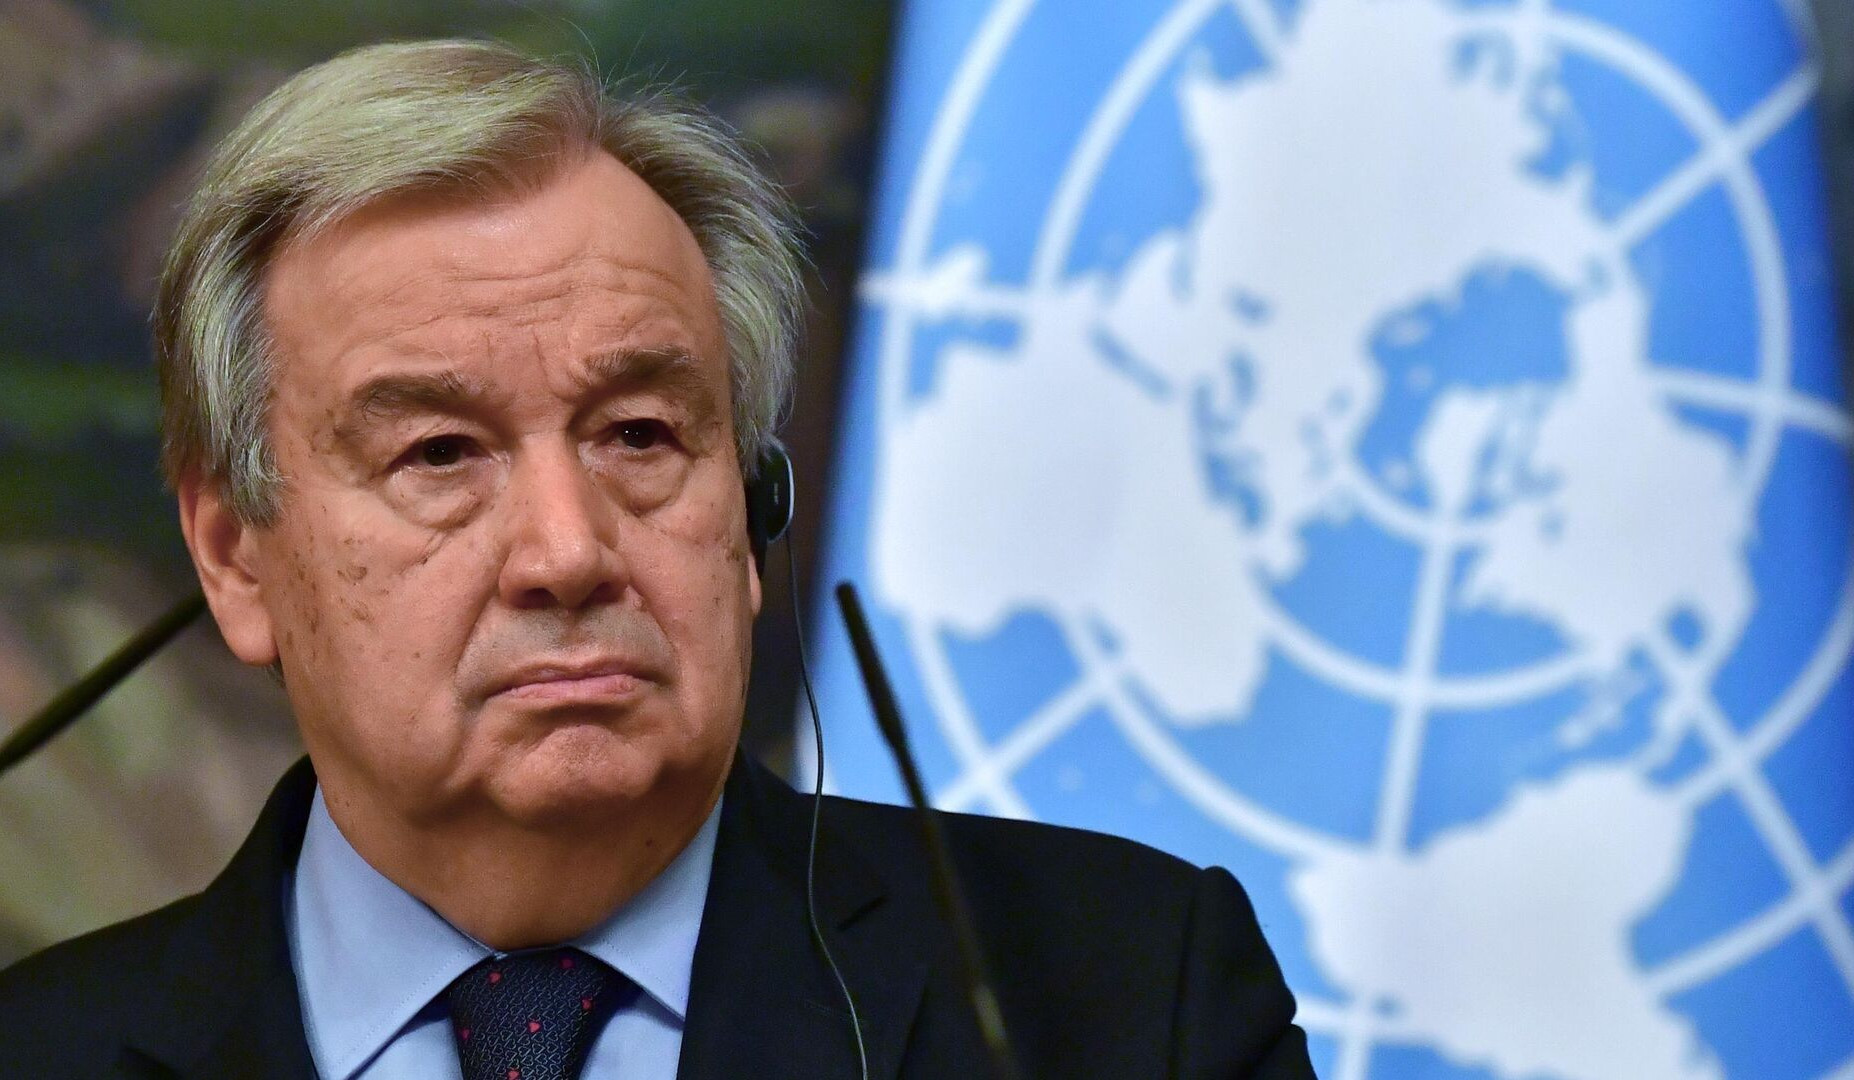 Guterres called for immediate ceasefire in Gaza Strip and release of prisoners